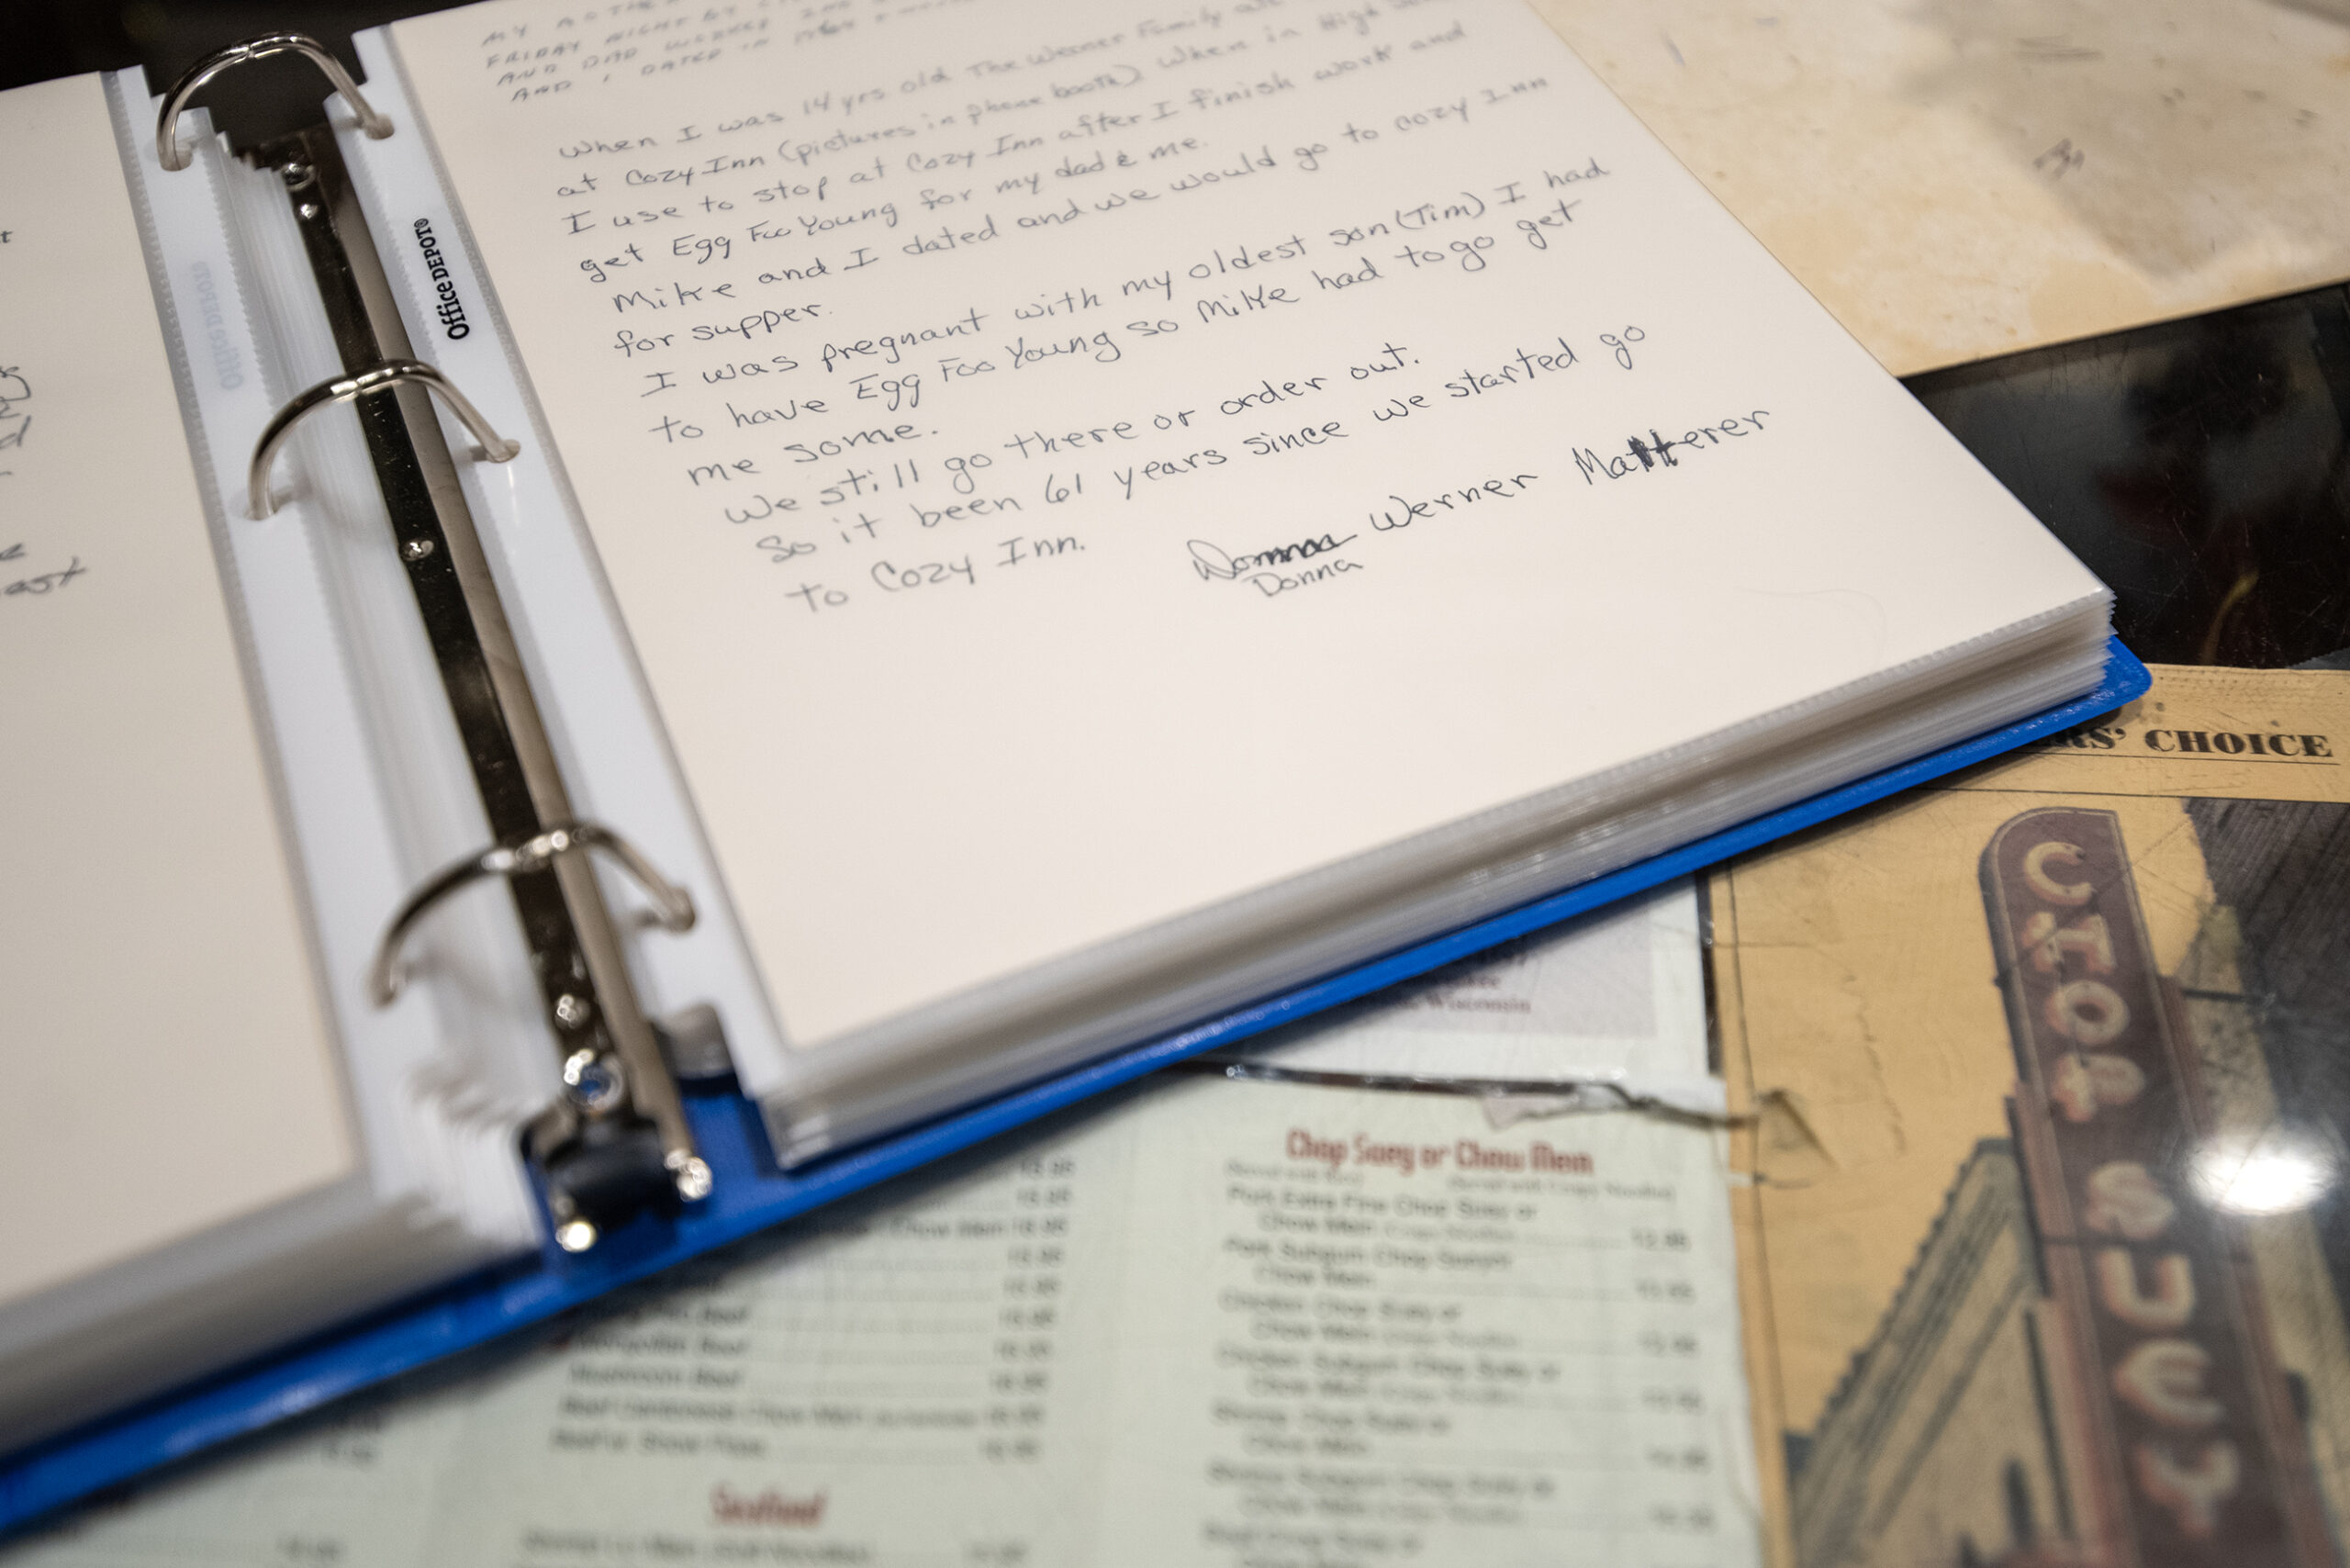 Cozy Inn customers wrote down their memories to celebrate the Chinese restaurant’s 100th anniversary in downtown Janesville, Wis. (Angela Major/WPR)